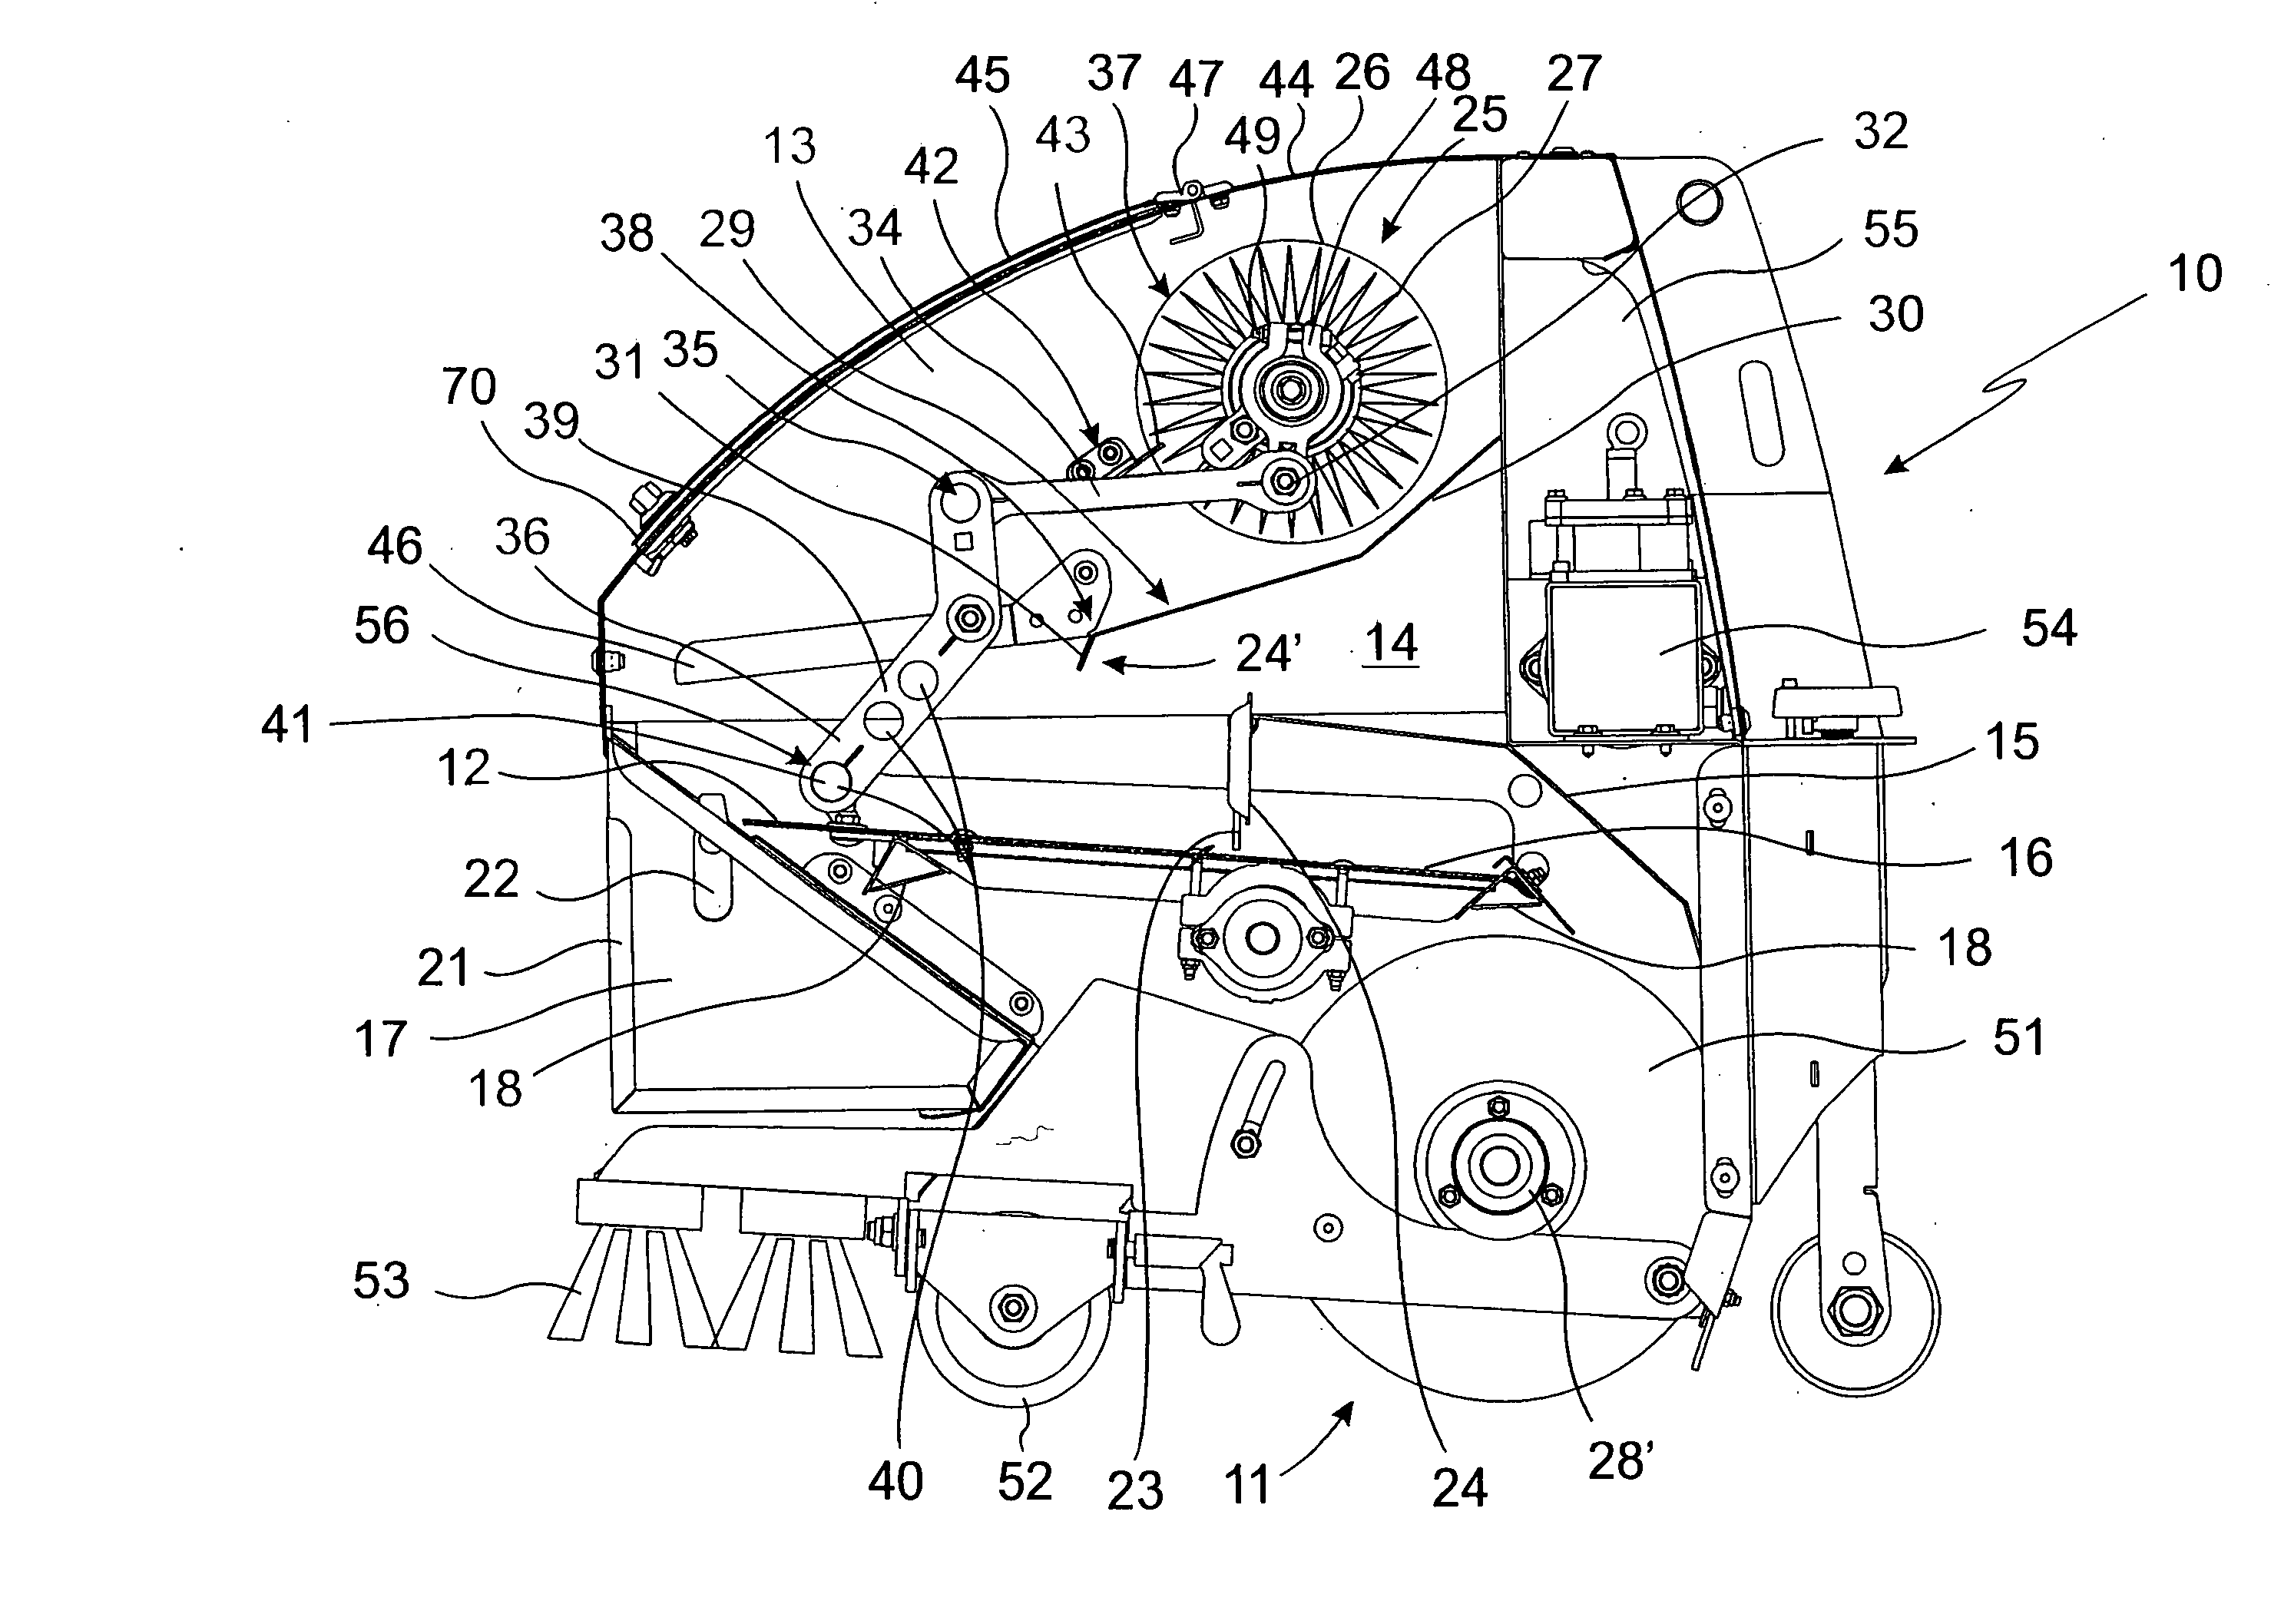 Driving device for taking away filling material from a surface